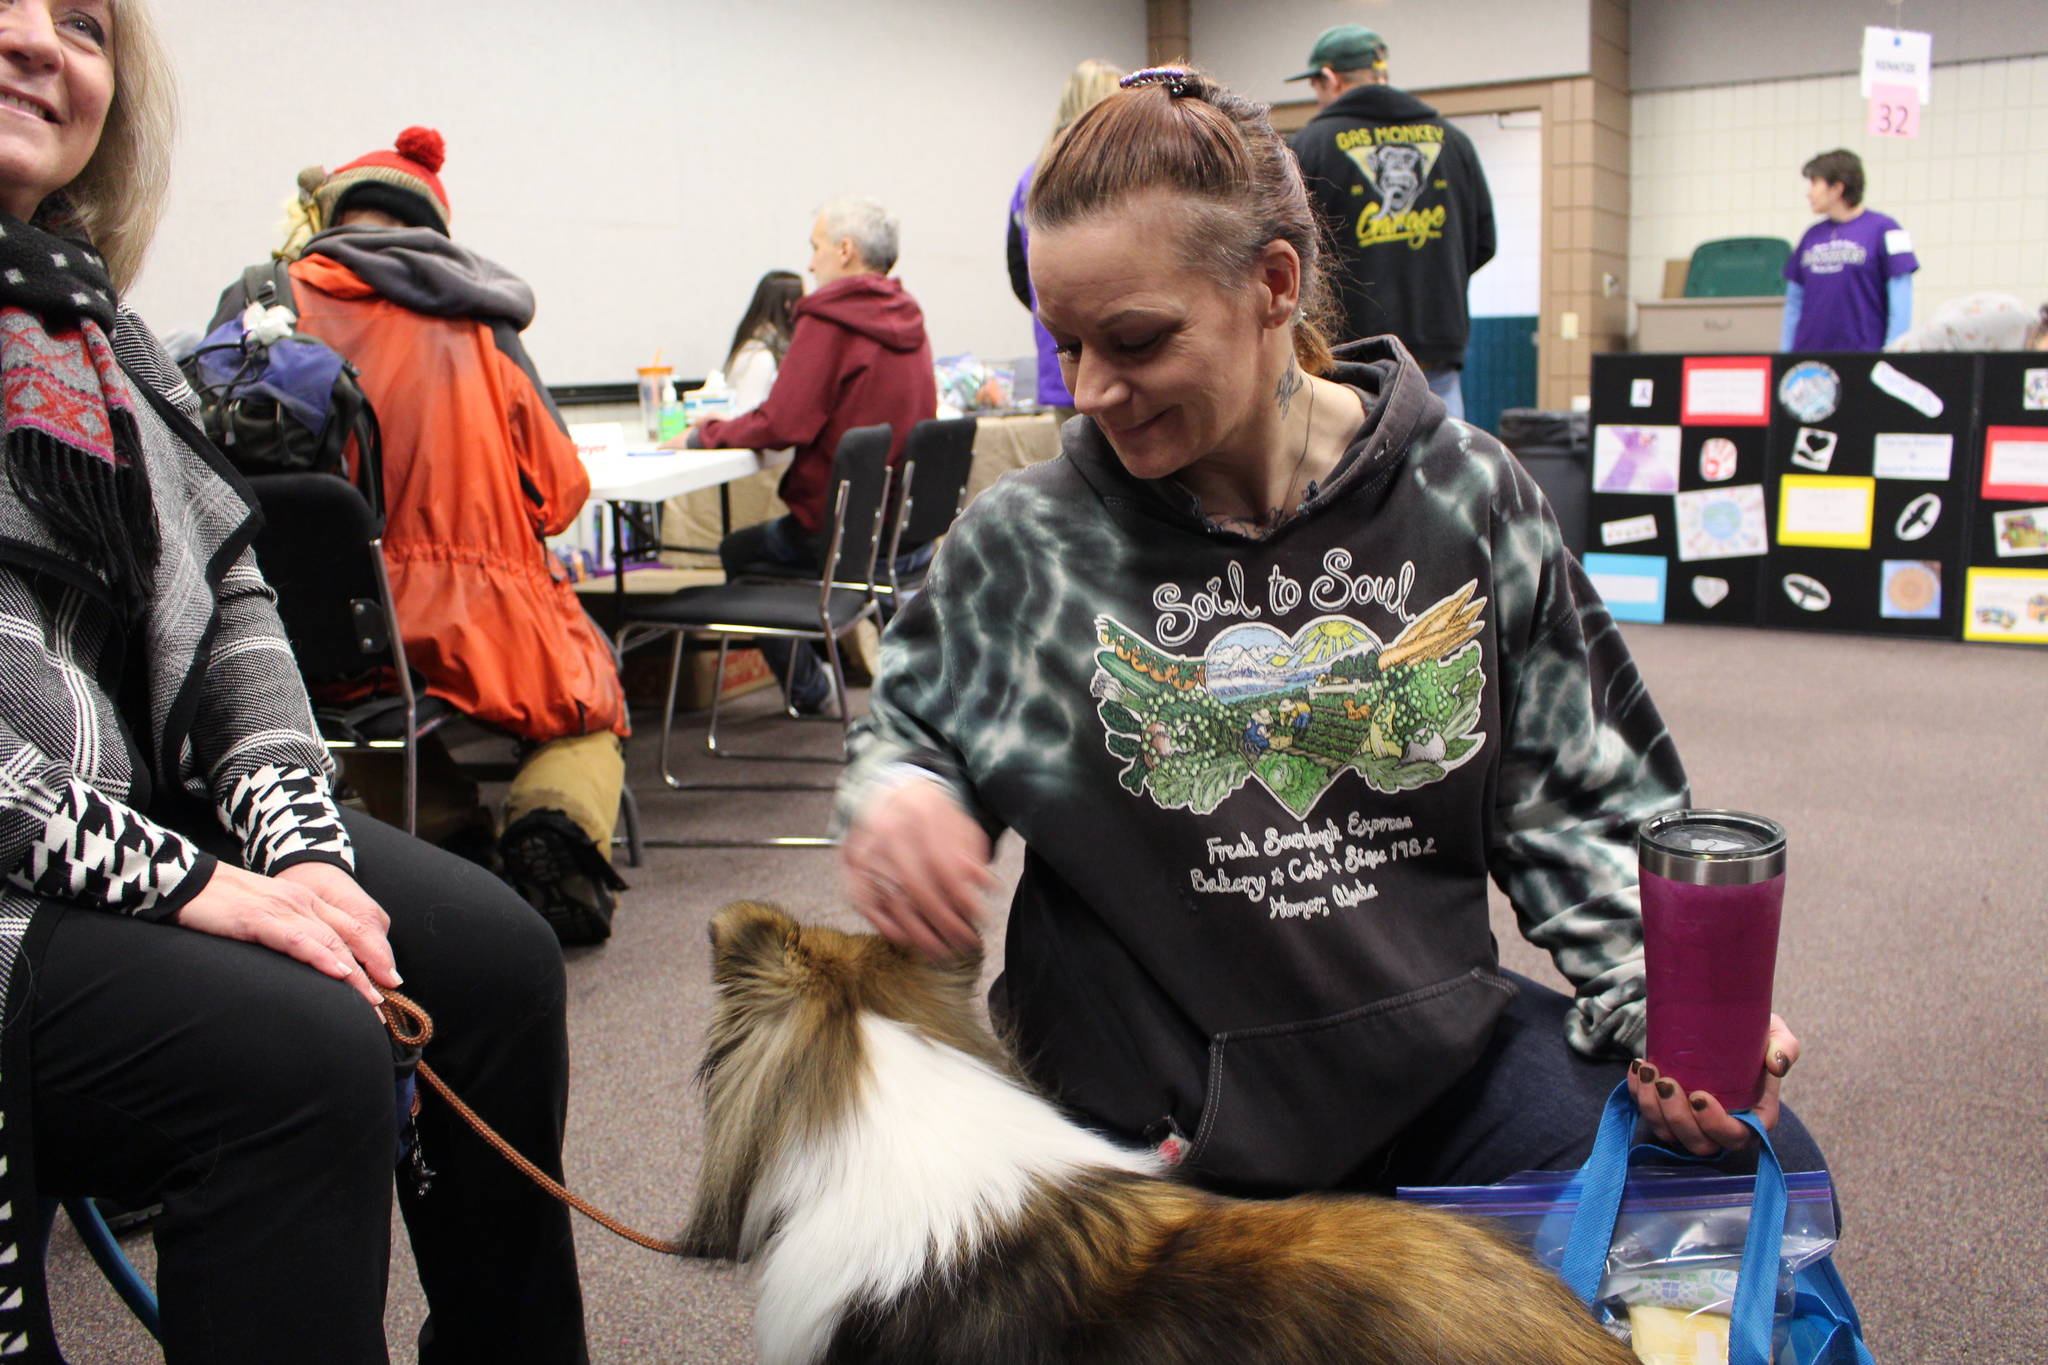 Pam Rickard visits with Collette the therapy dog during the 2020 Project Homeless Connect event at the Soldotna Regional Sports Complex in Soldotna, Alaska, on Jan. 29, 2020. (Photo by Brian Mazurek/Peninsula Clarion)